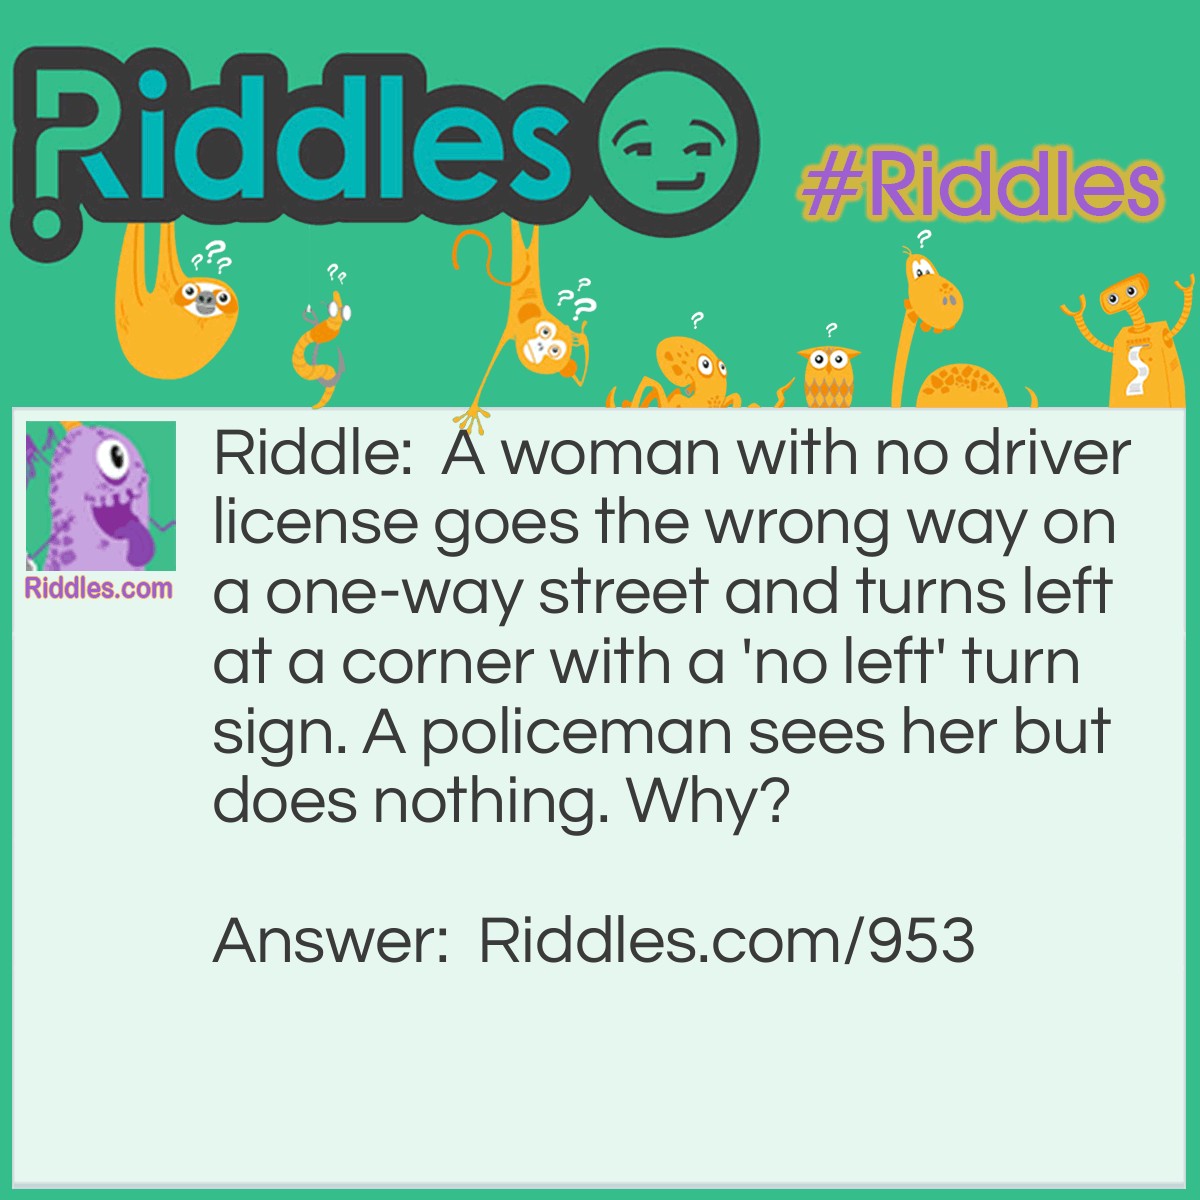 Riddle: A woman with no driver license goes the wrong way on a one-way street and turns left at a corner with a 'no left' turn sign. A policeman sees her but does nothing. Why? Answer: She's walking.